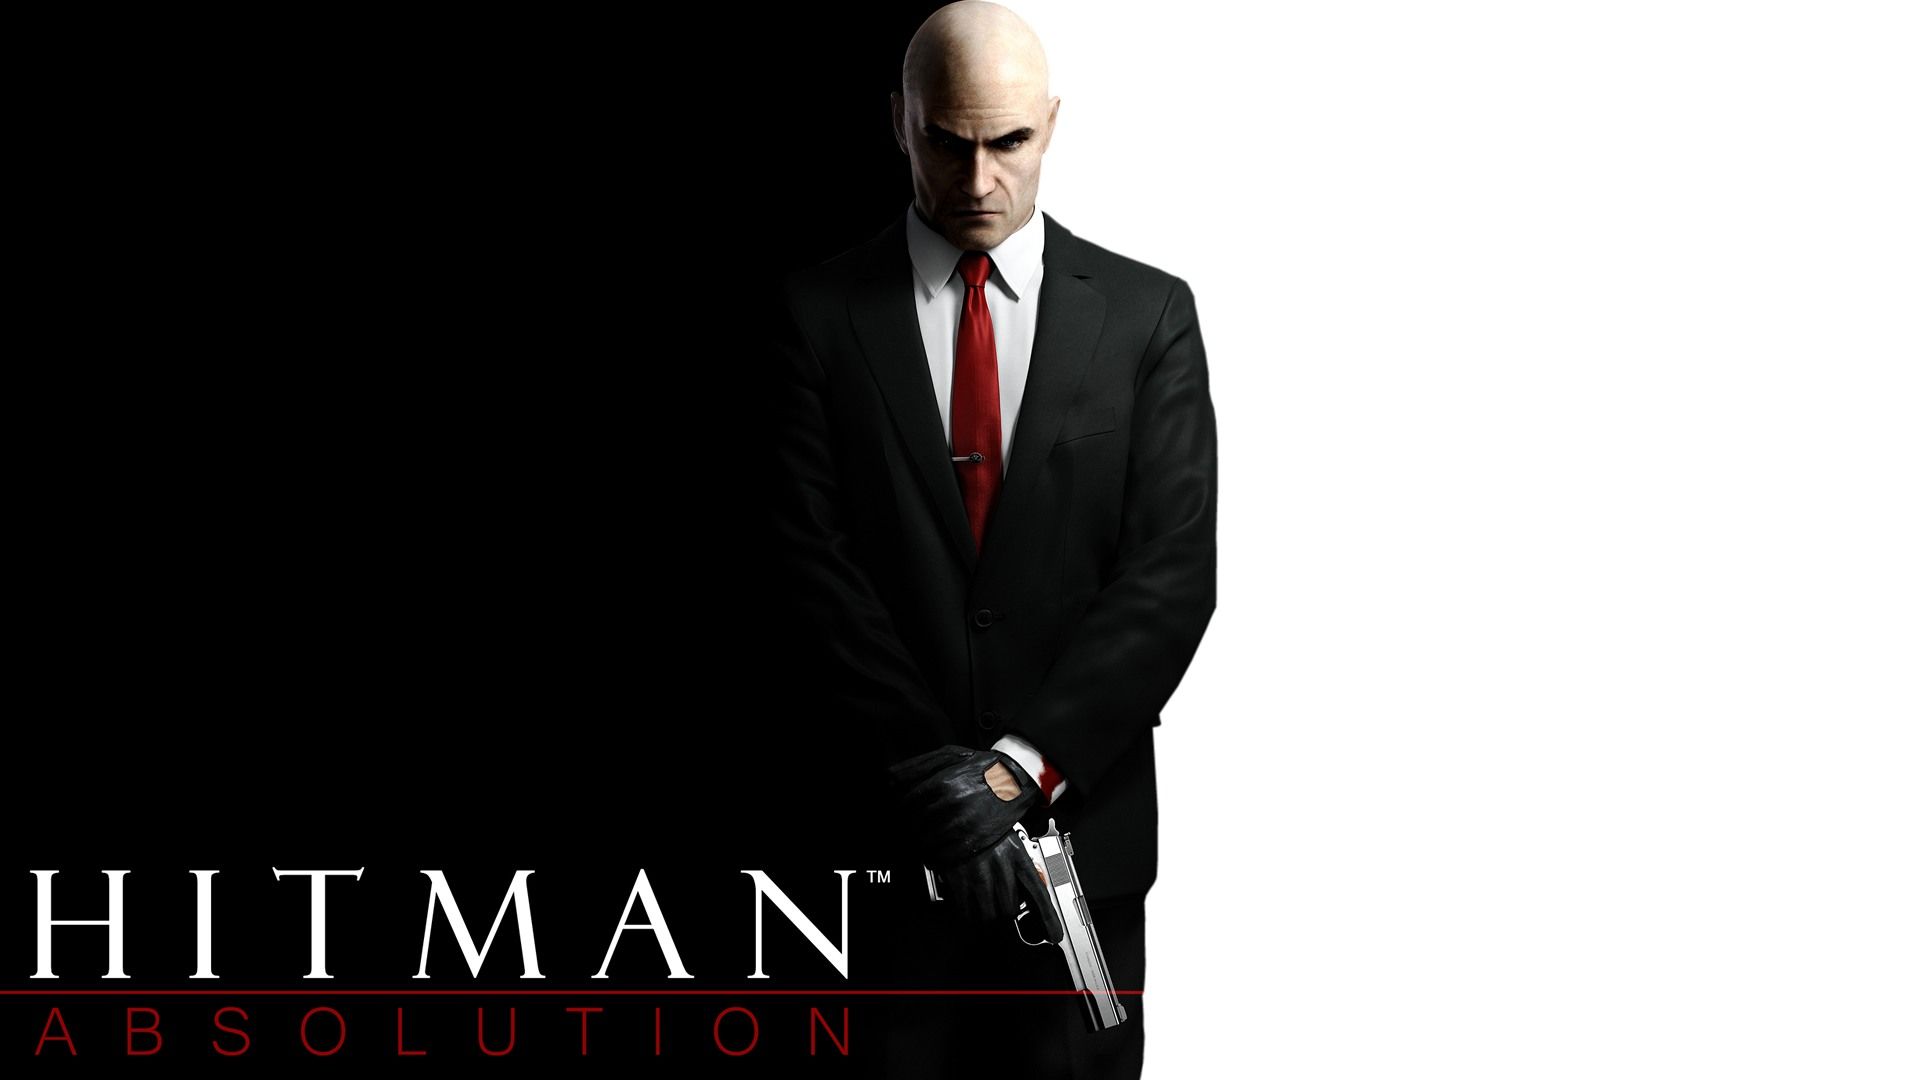 Hitman Agent 47 HD Wallpaper and Images | Cool Backgrounds